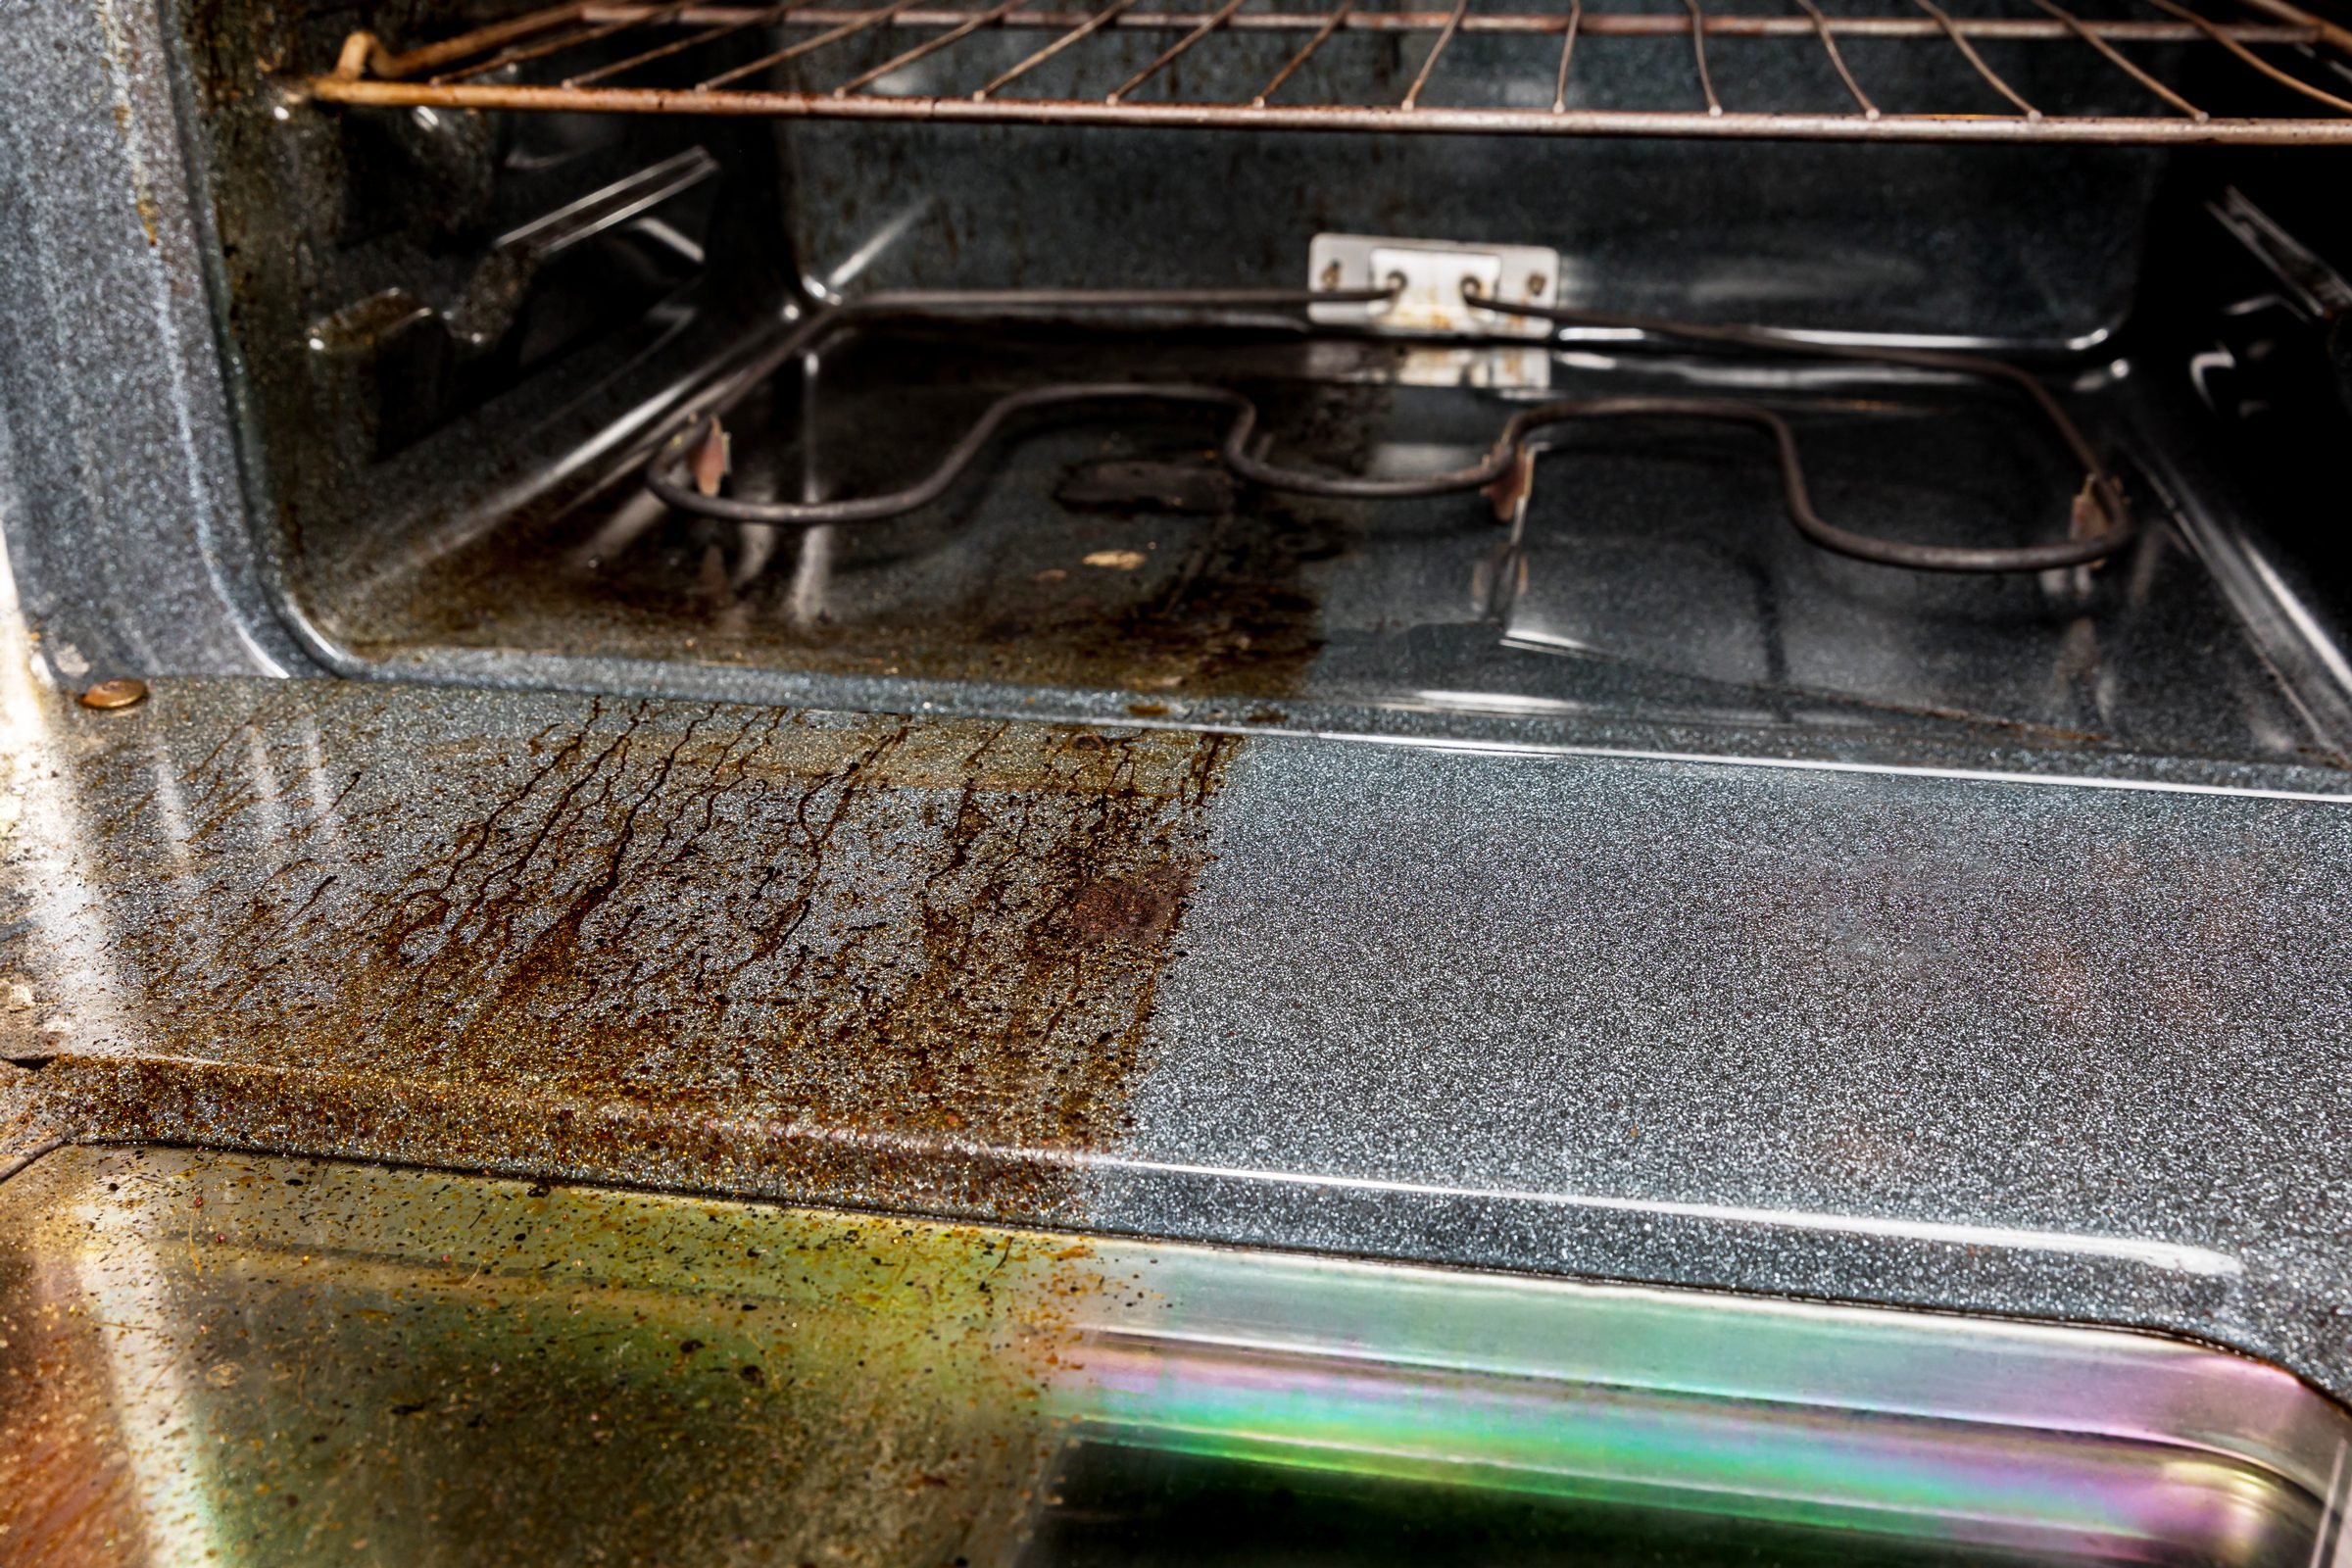 How to Use a Self-Cleaning Oven Feature Safely & Effectively